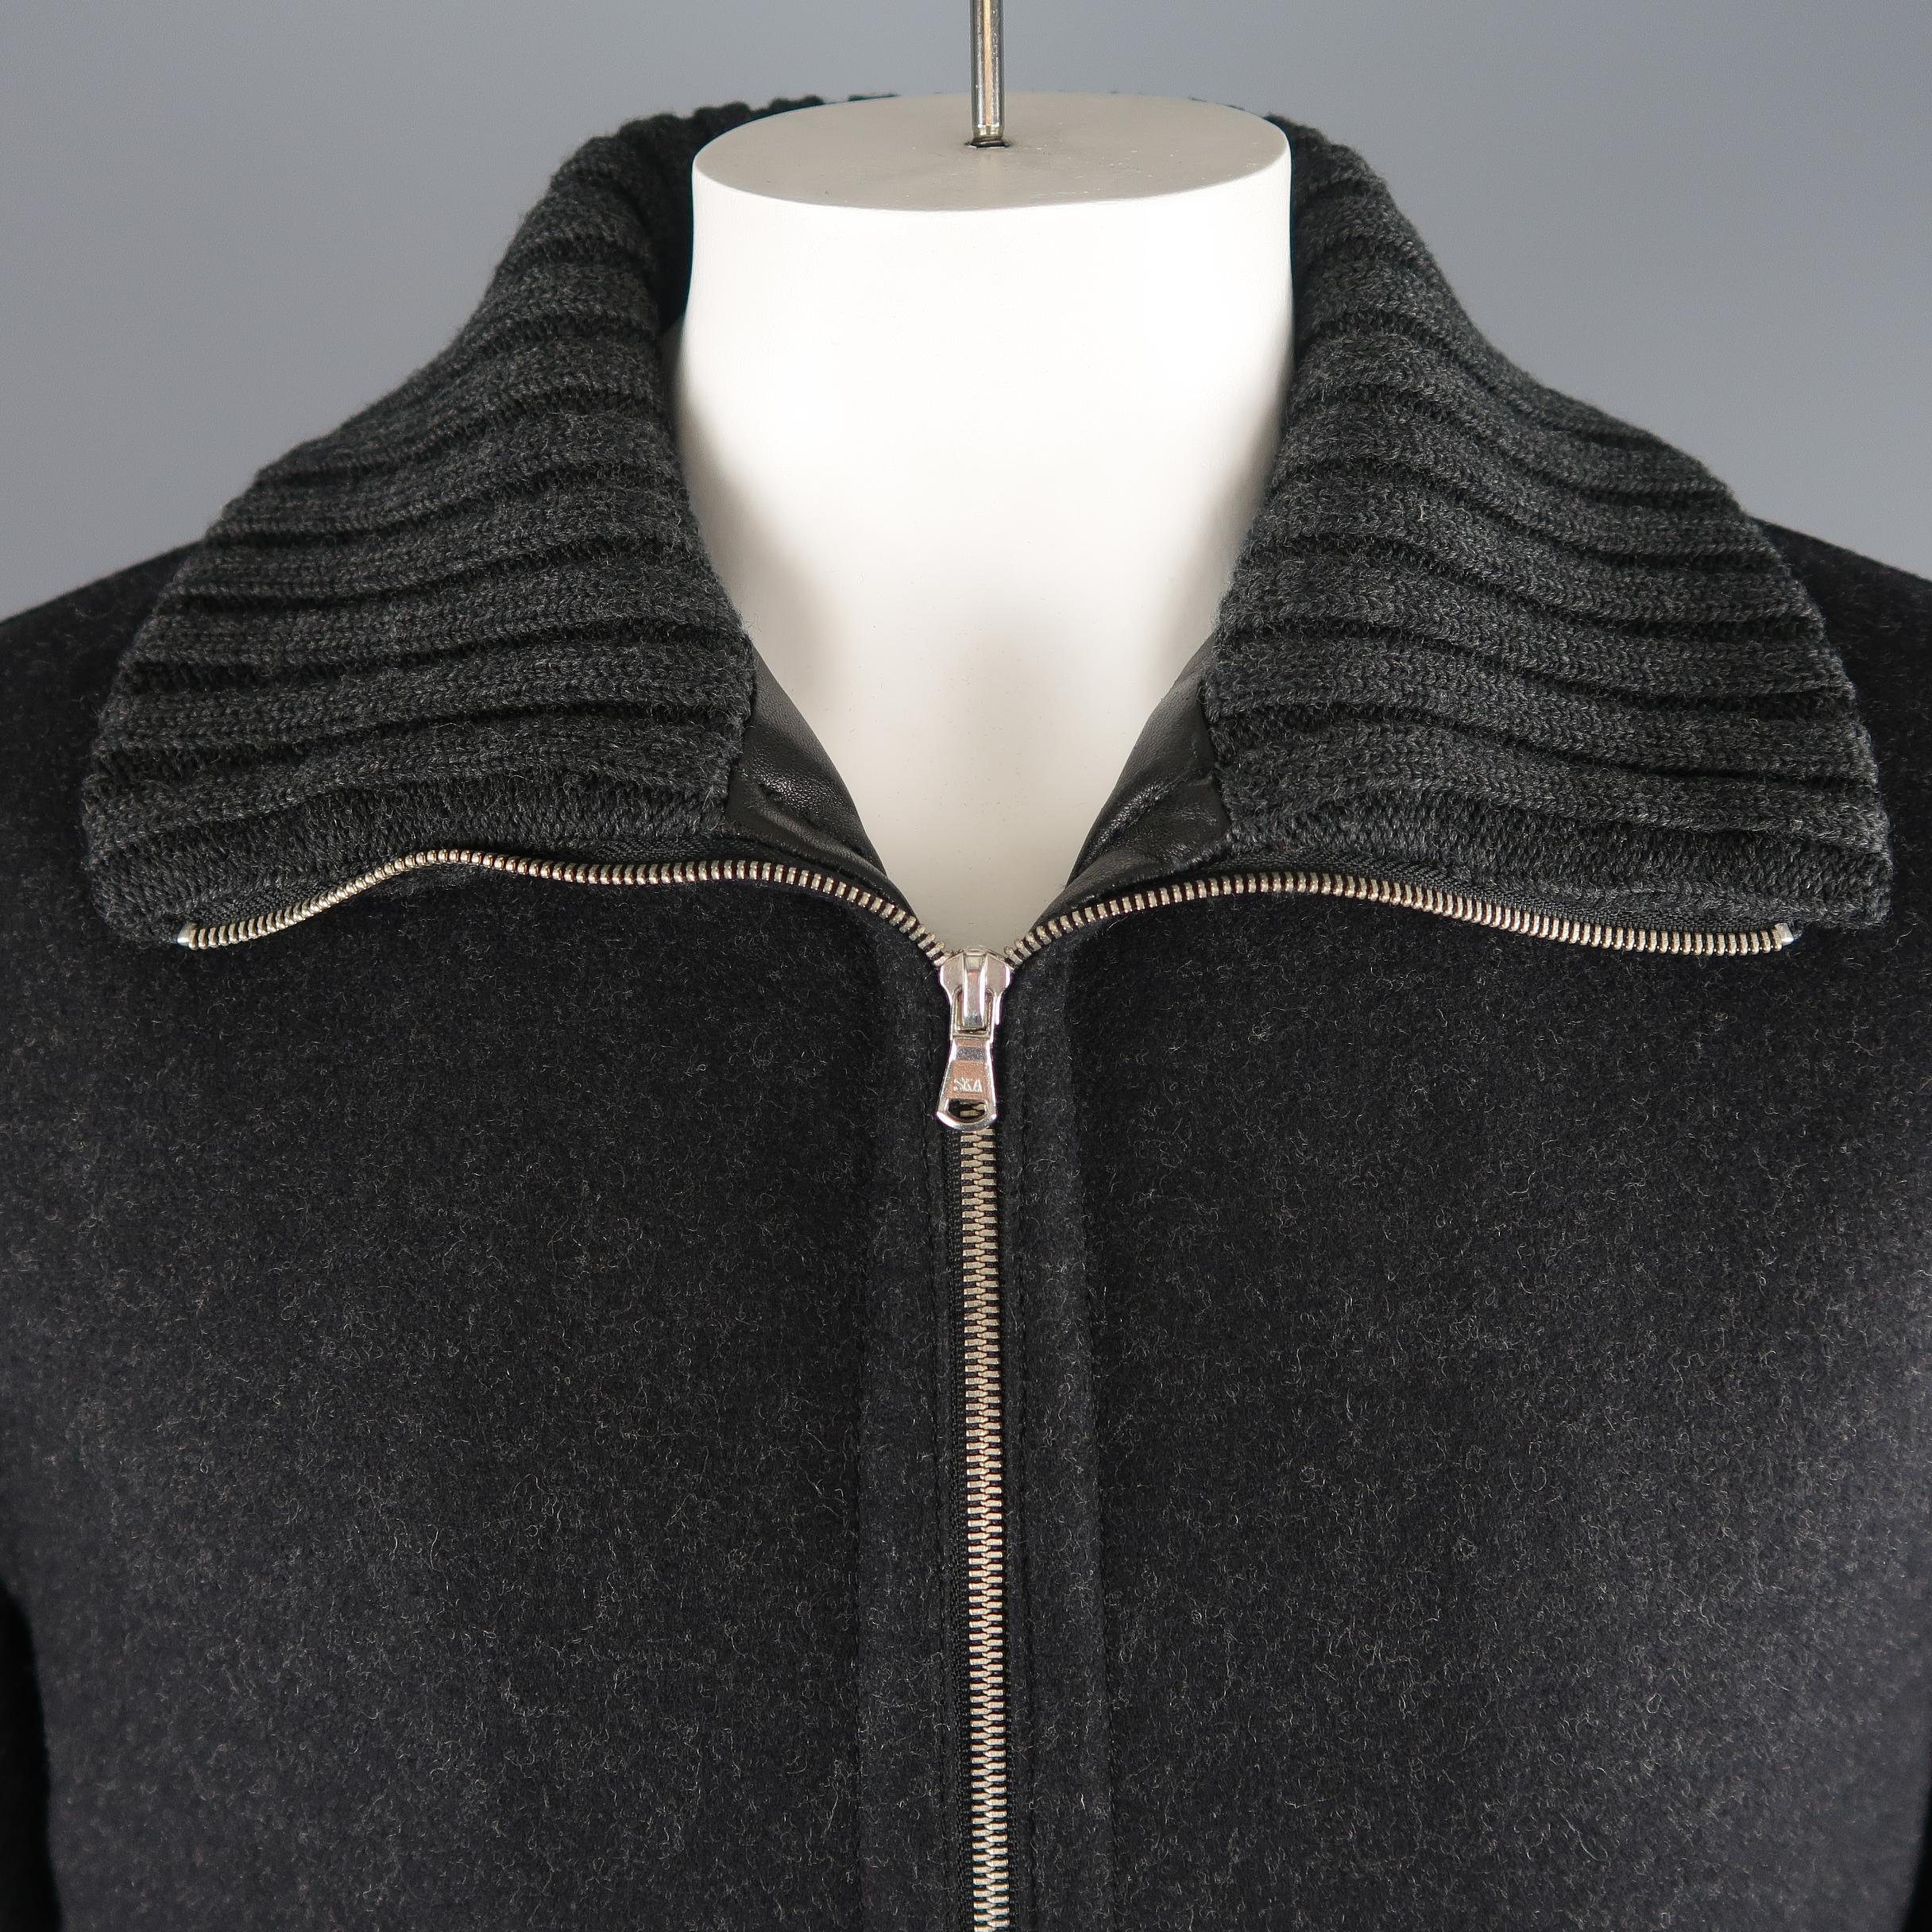 Dolce & Gabbana jacket comes in charcoal gray textured wool with a zip up front, leather detailed slated pockets, quilted liner, and cable knit collar. Made in Italy.
 
Excellent Pre-Owned Condition.
Marked: IT 52
 
Measurements:
 
Shoulder: 18